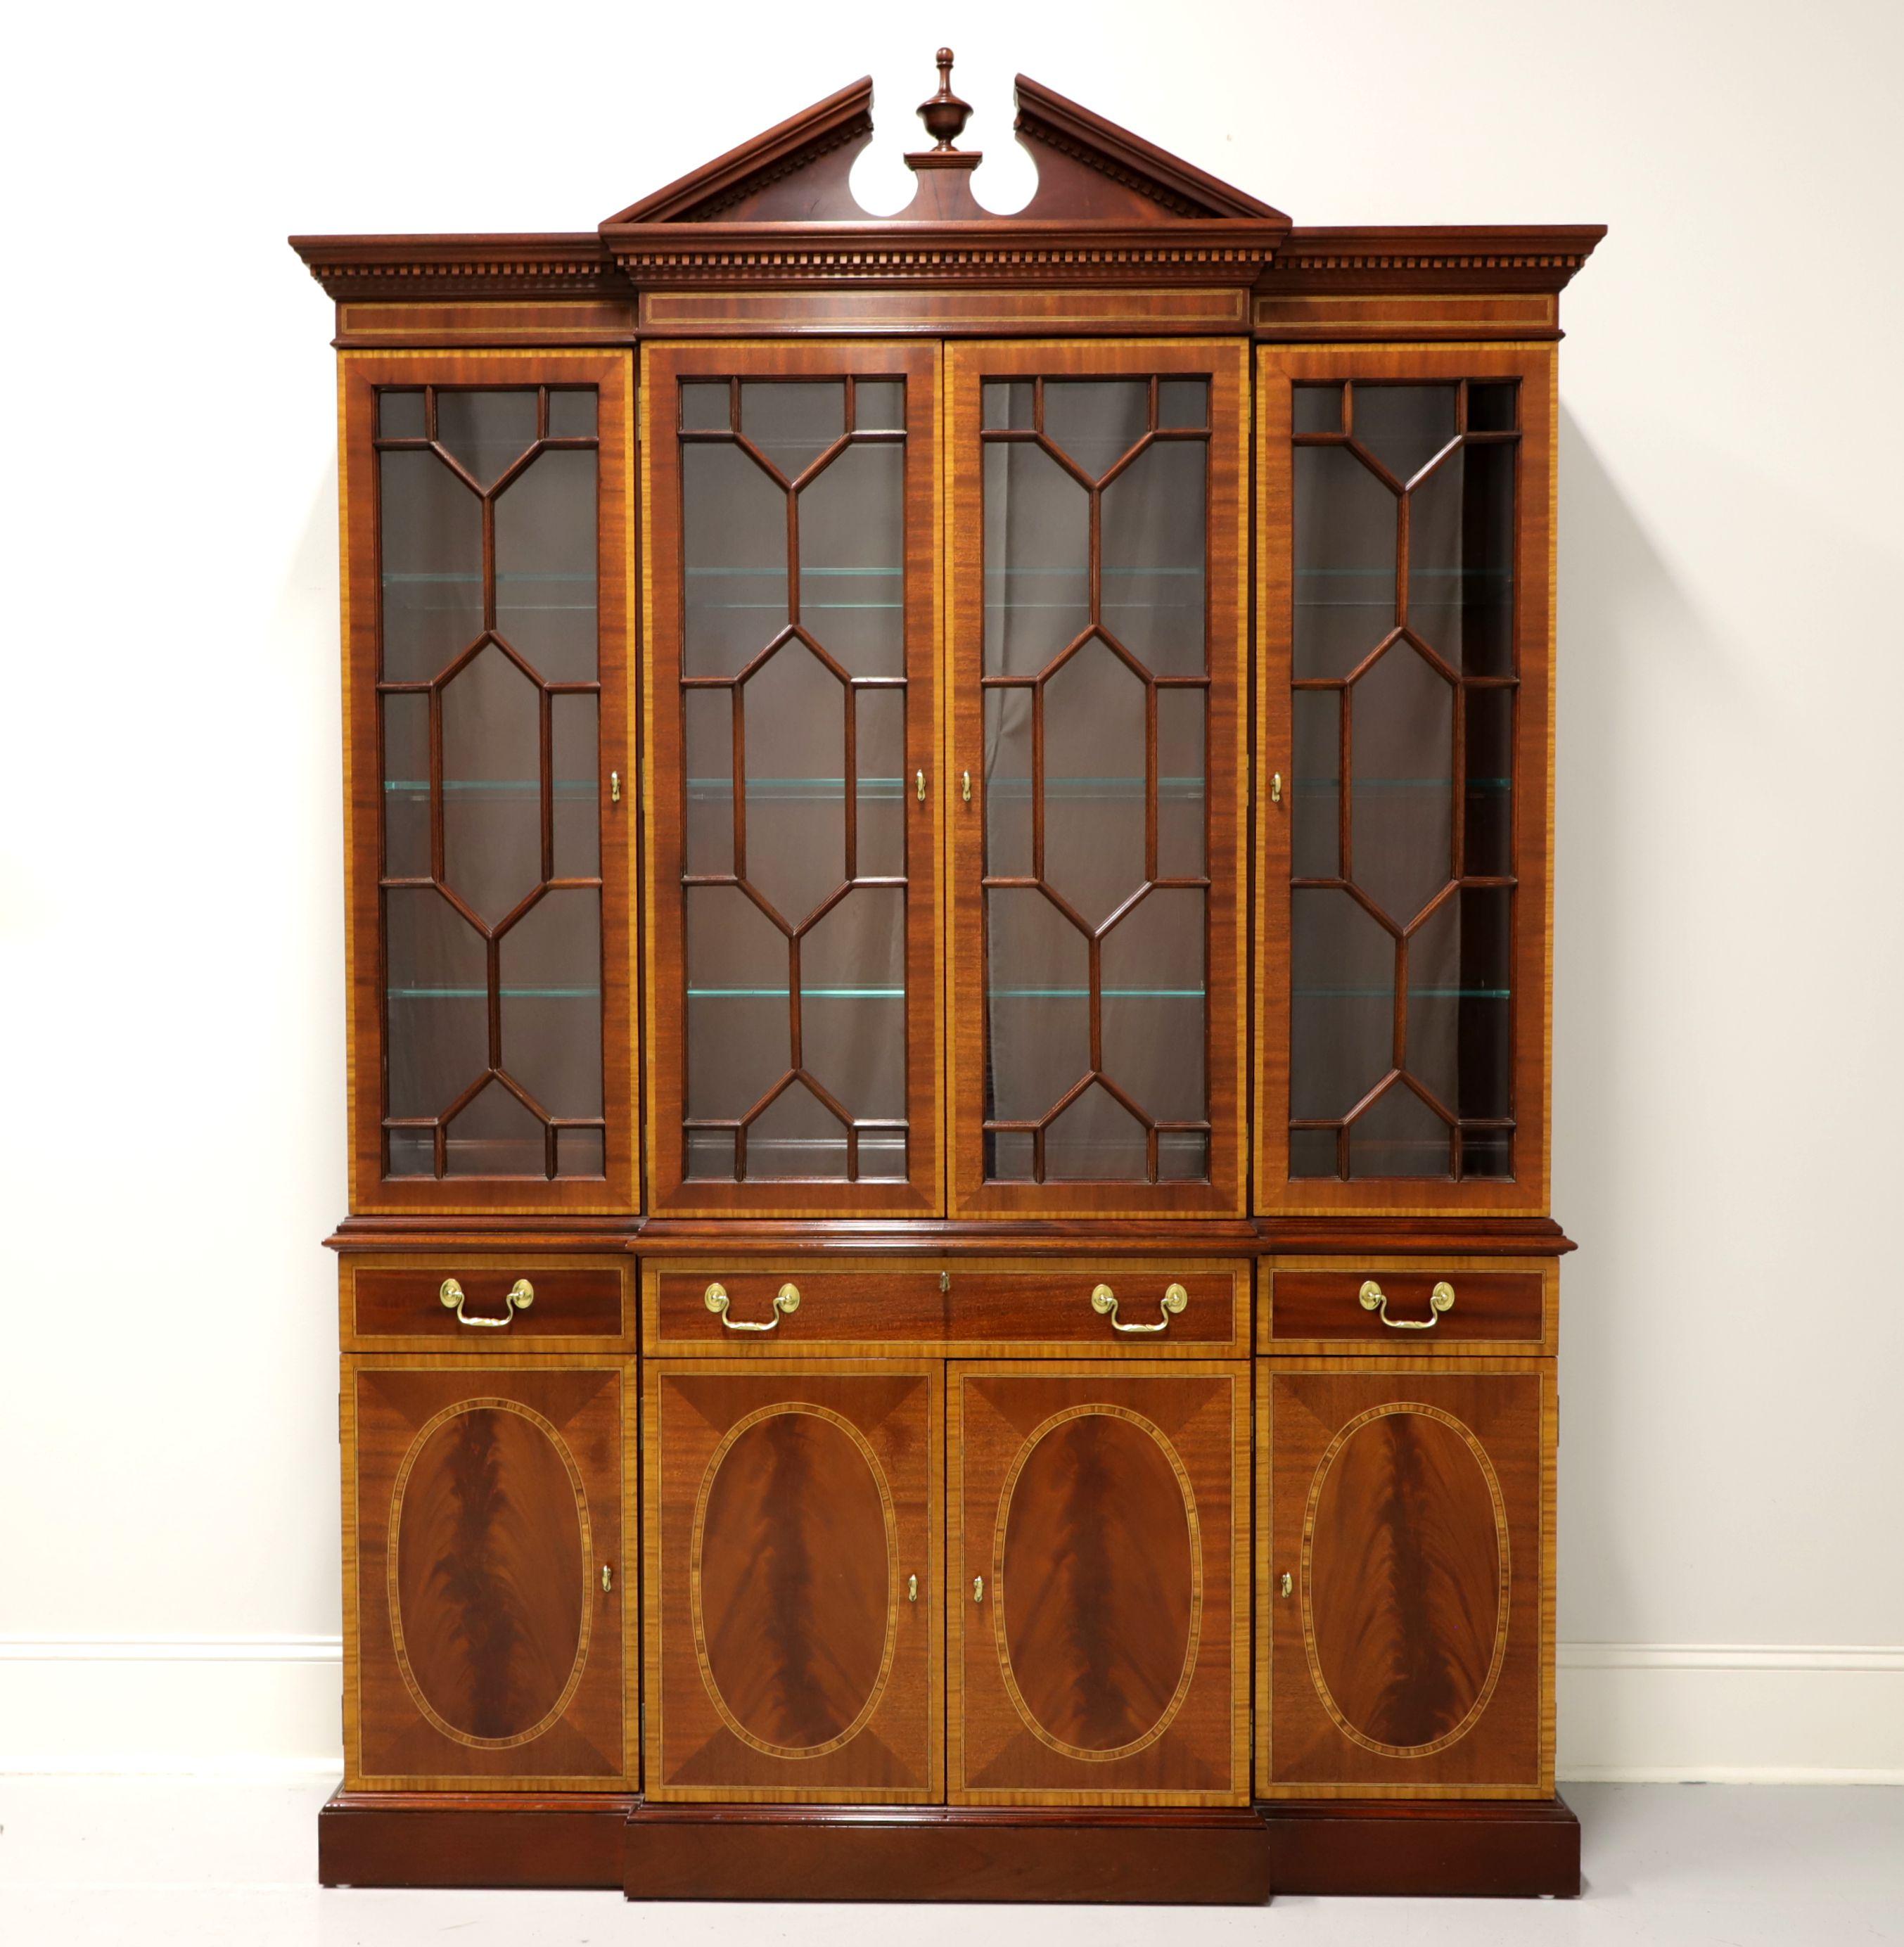 A breakfront china cabinet in the Hepplewhite style by Councill Craftsmen. Inlaid flame mahogany with brass hardware, pediment with finial & dentil moulding to top of cabinet and inlaid oval door fronts to lower cabinet. Upper lighted cabinet